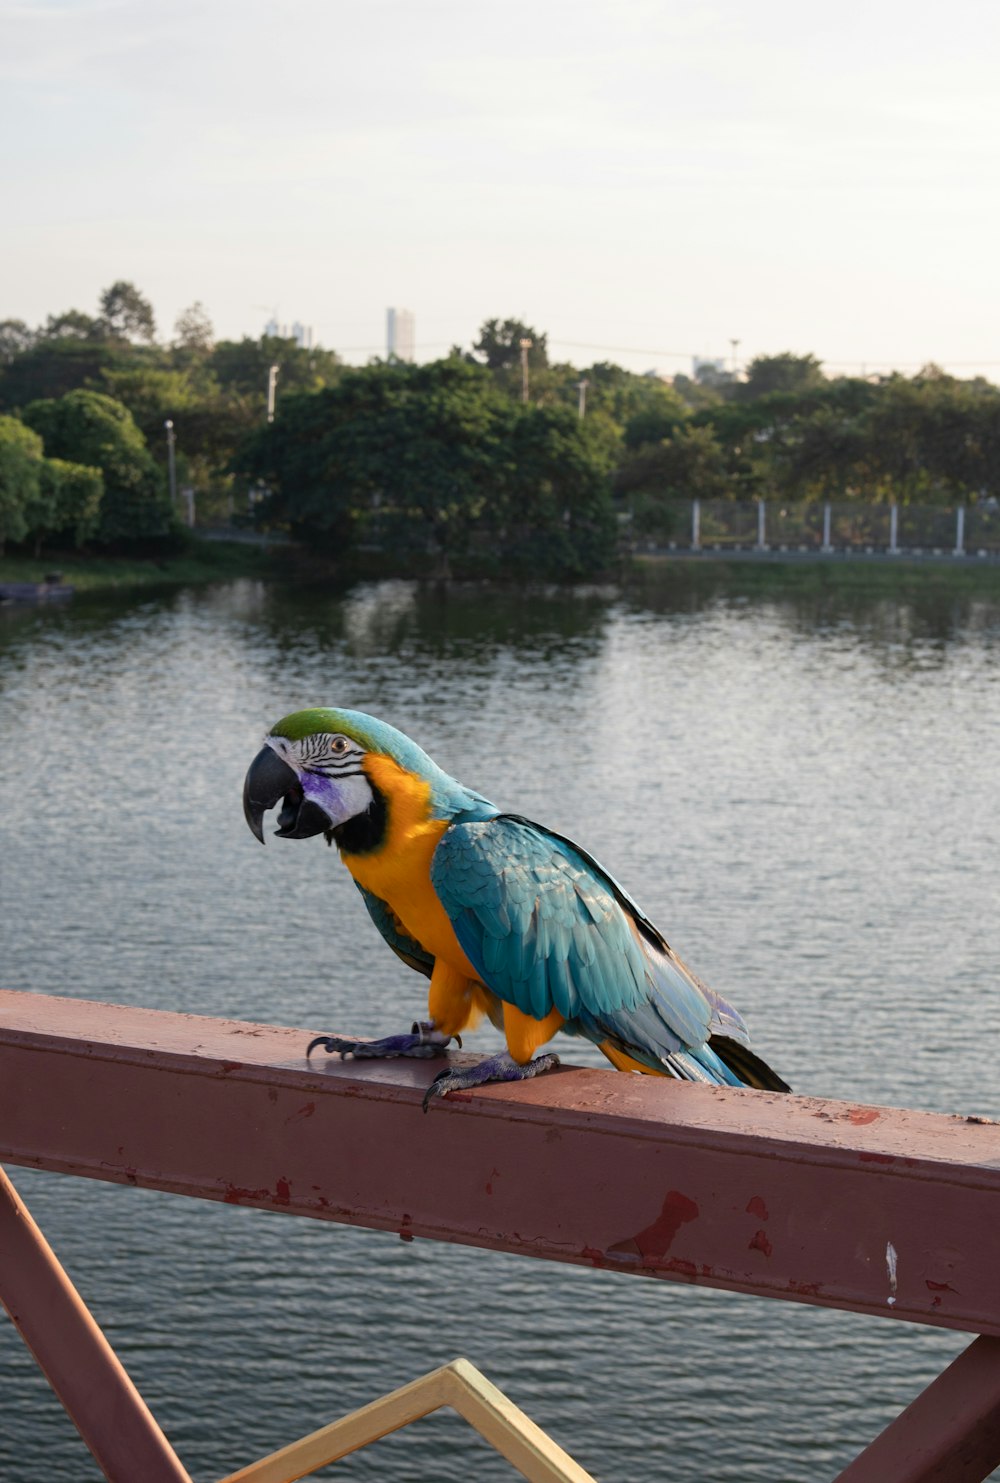 a colorful bird perched on a rail near a body of water